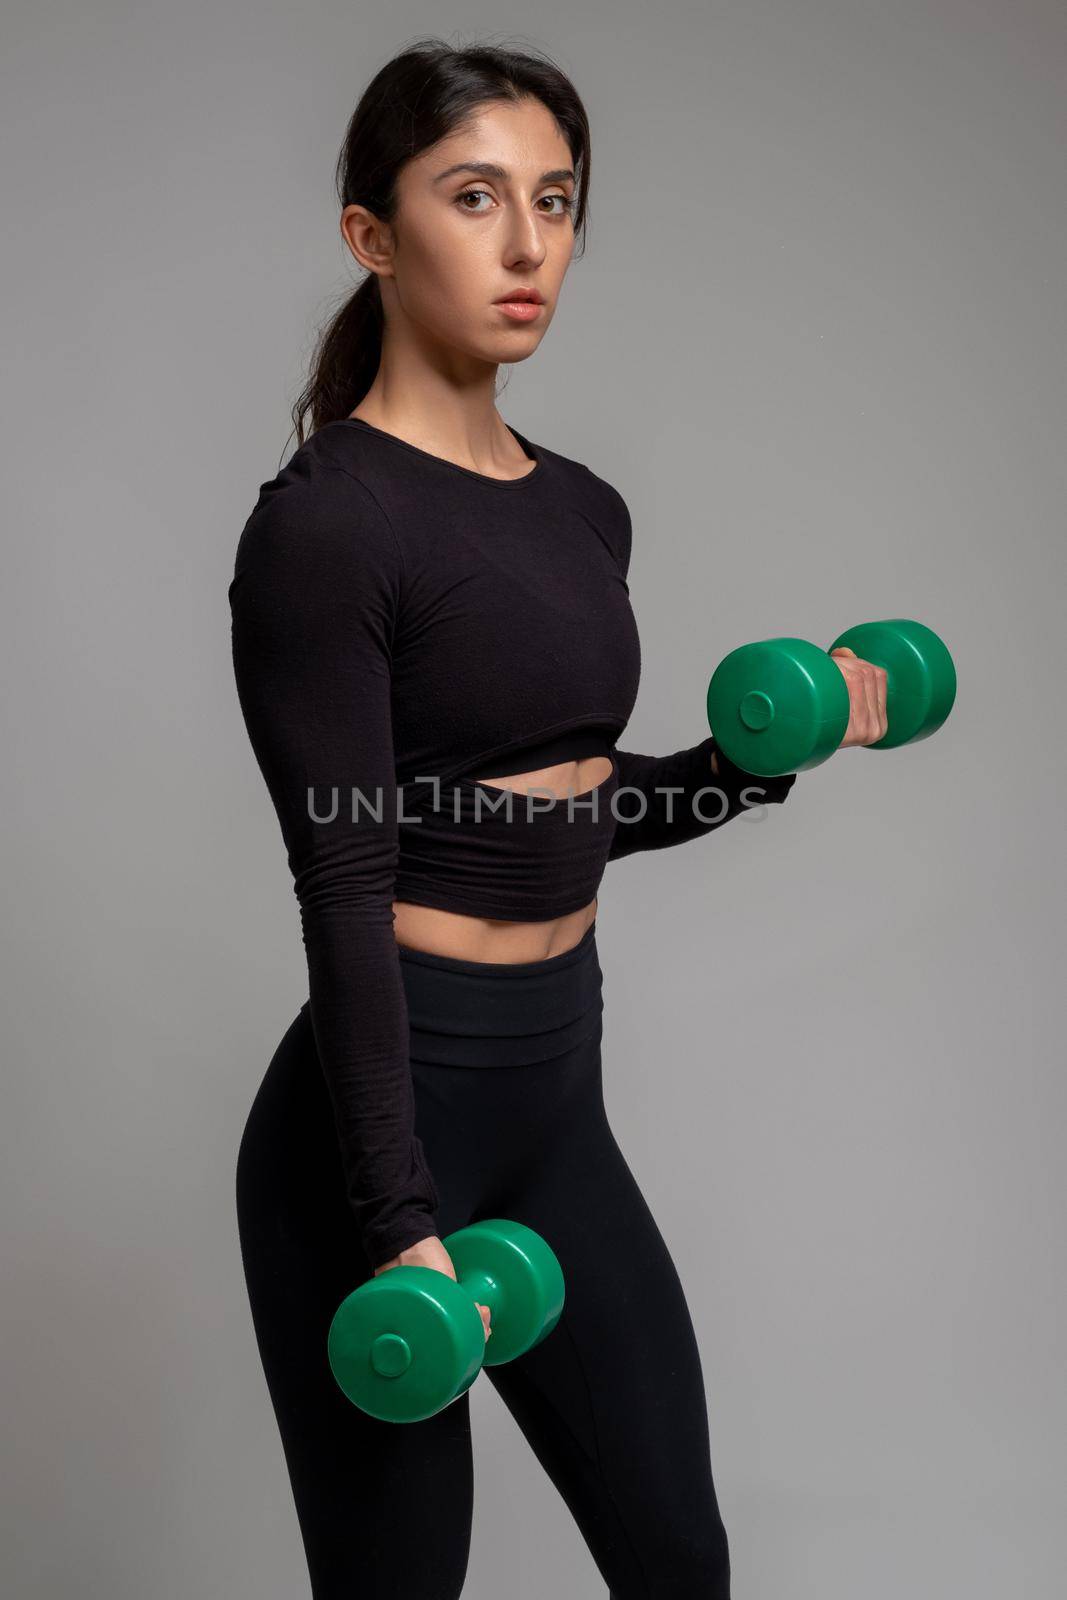 Athletic girl performing set of arm exercises with dumbbells in studio on grey background, confidently looking at camera. Sports motivation concept